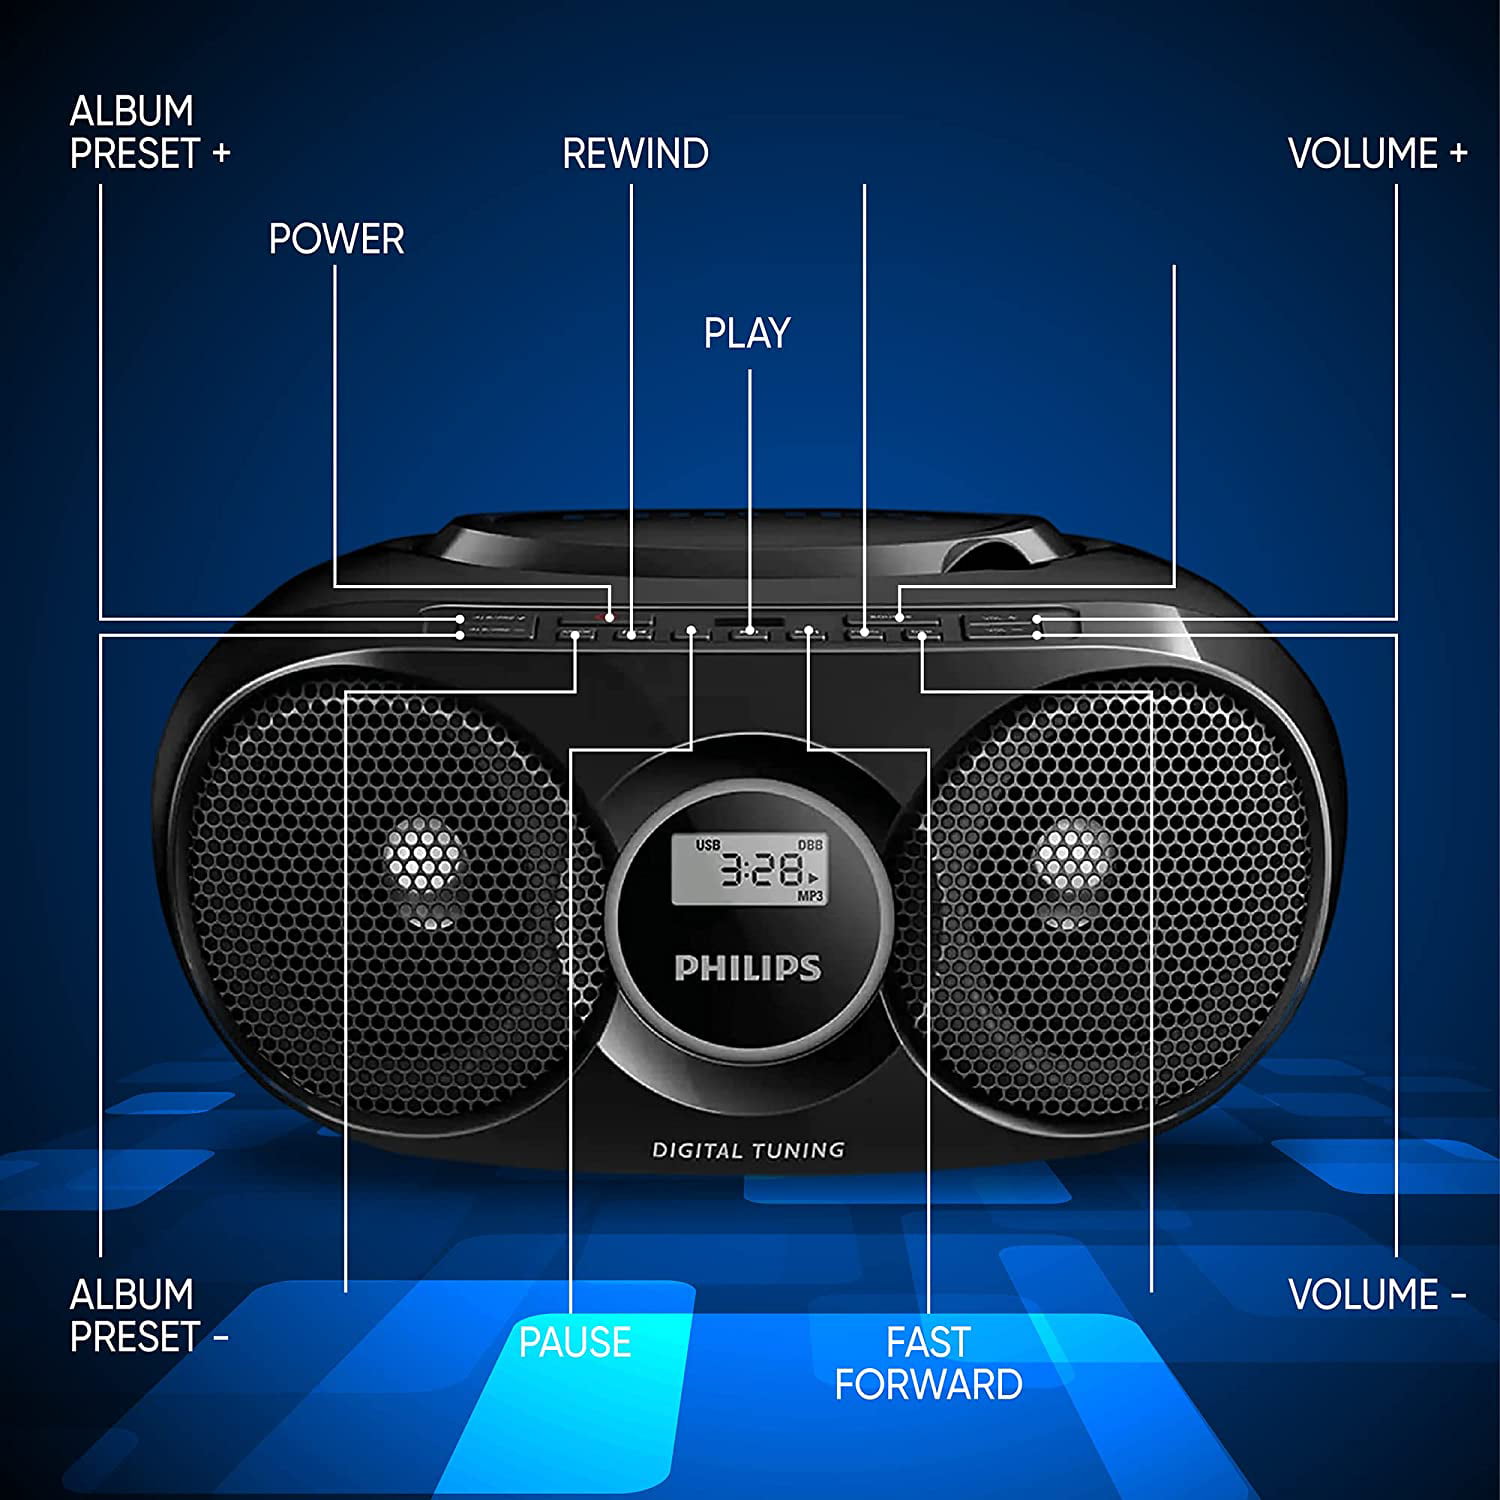 Philips Portable Boombox with CD Cassette Player for MP3-CD, CD, and CD-R/RW - Walmart.com